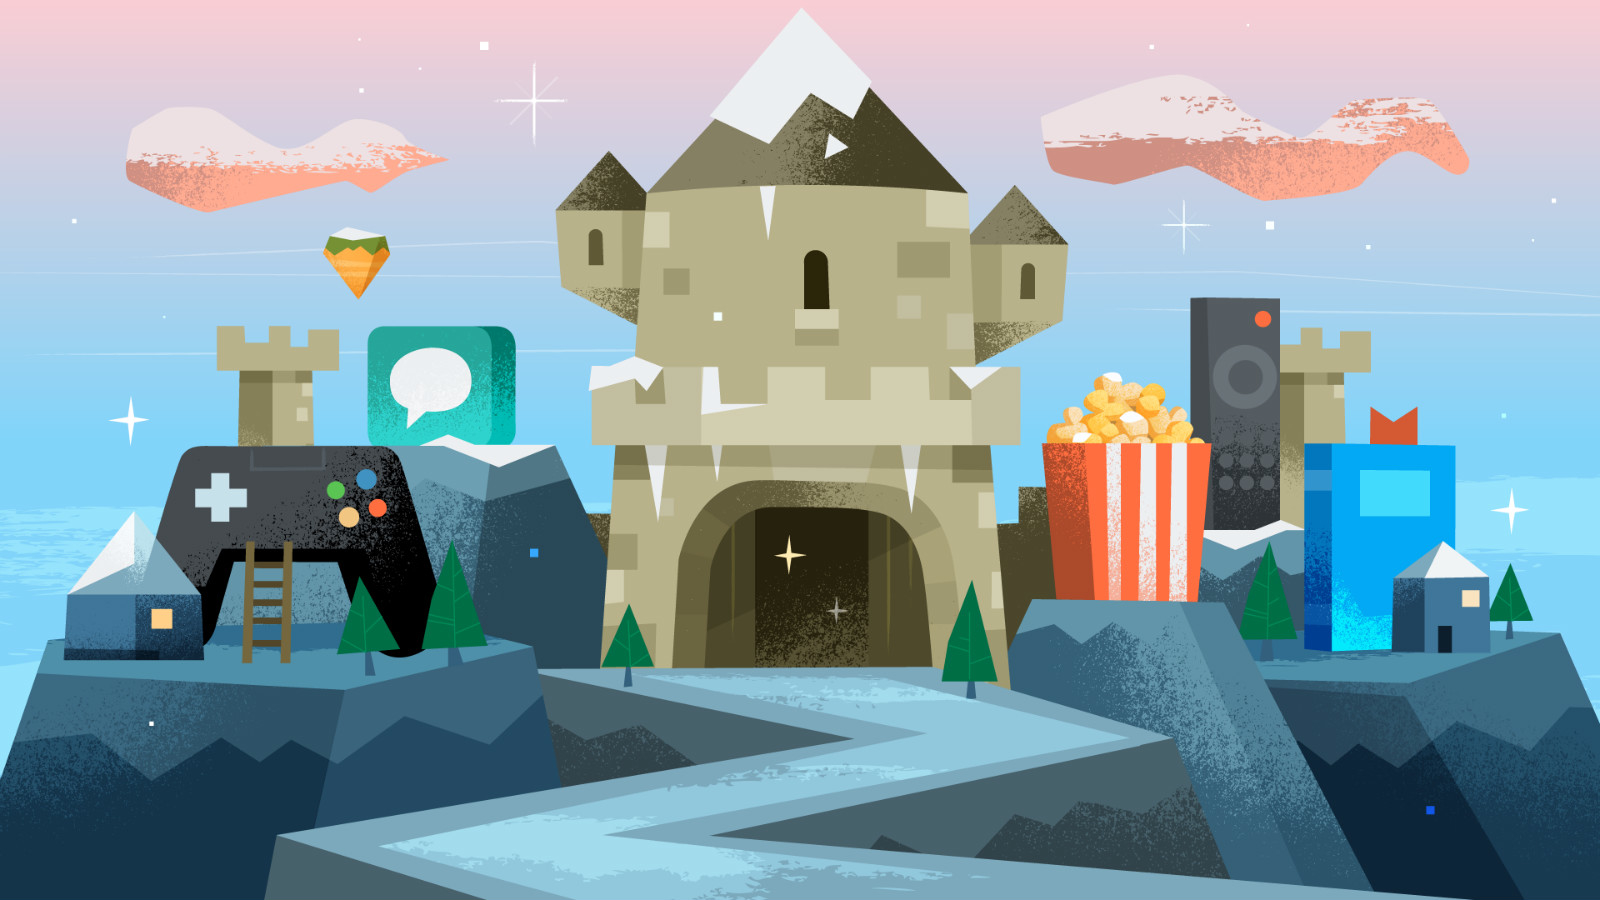 Google kicks off 12 Days of Play promotion on the Play Store